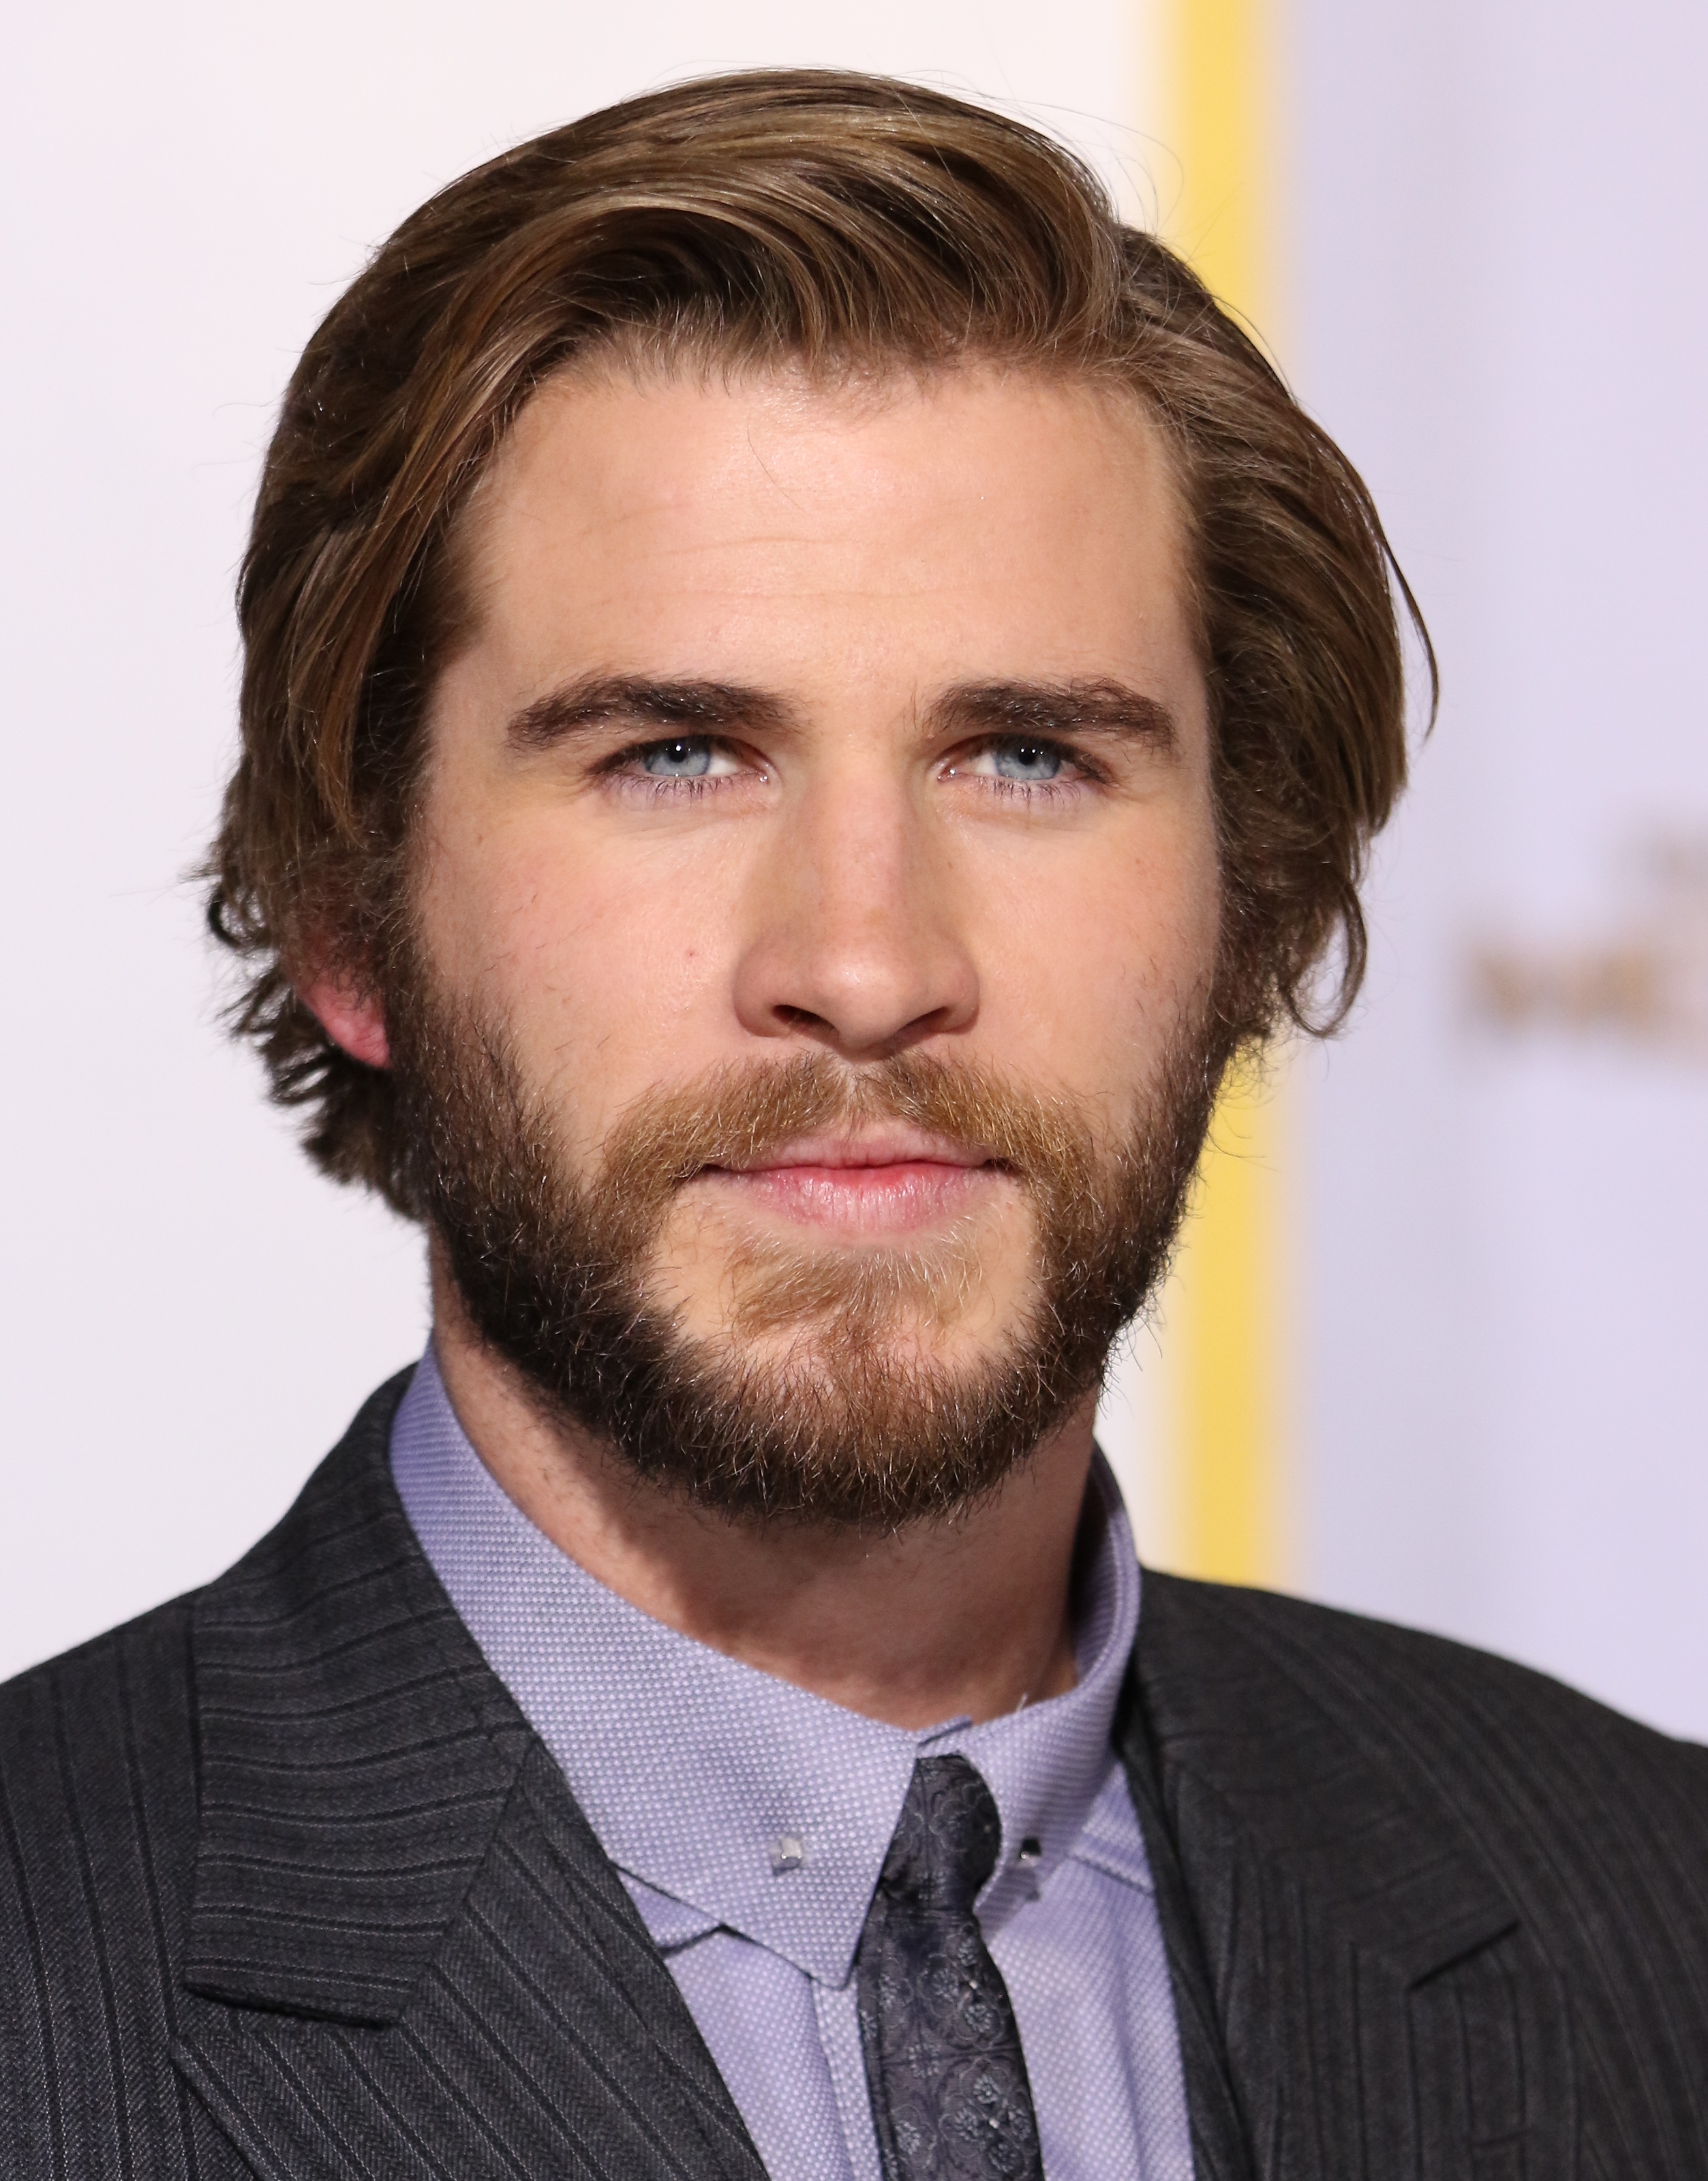 Liam Hemsworth attends the Los Angeles premiere of "The Hunger Games: Mockingjay - Part 1" on November 17, 2014 in Los Angeles, California | Source: Getty Images